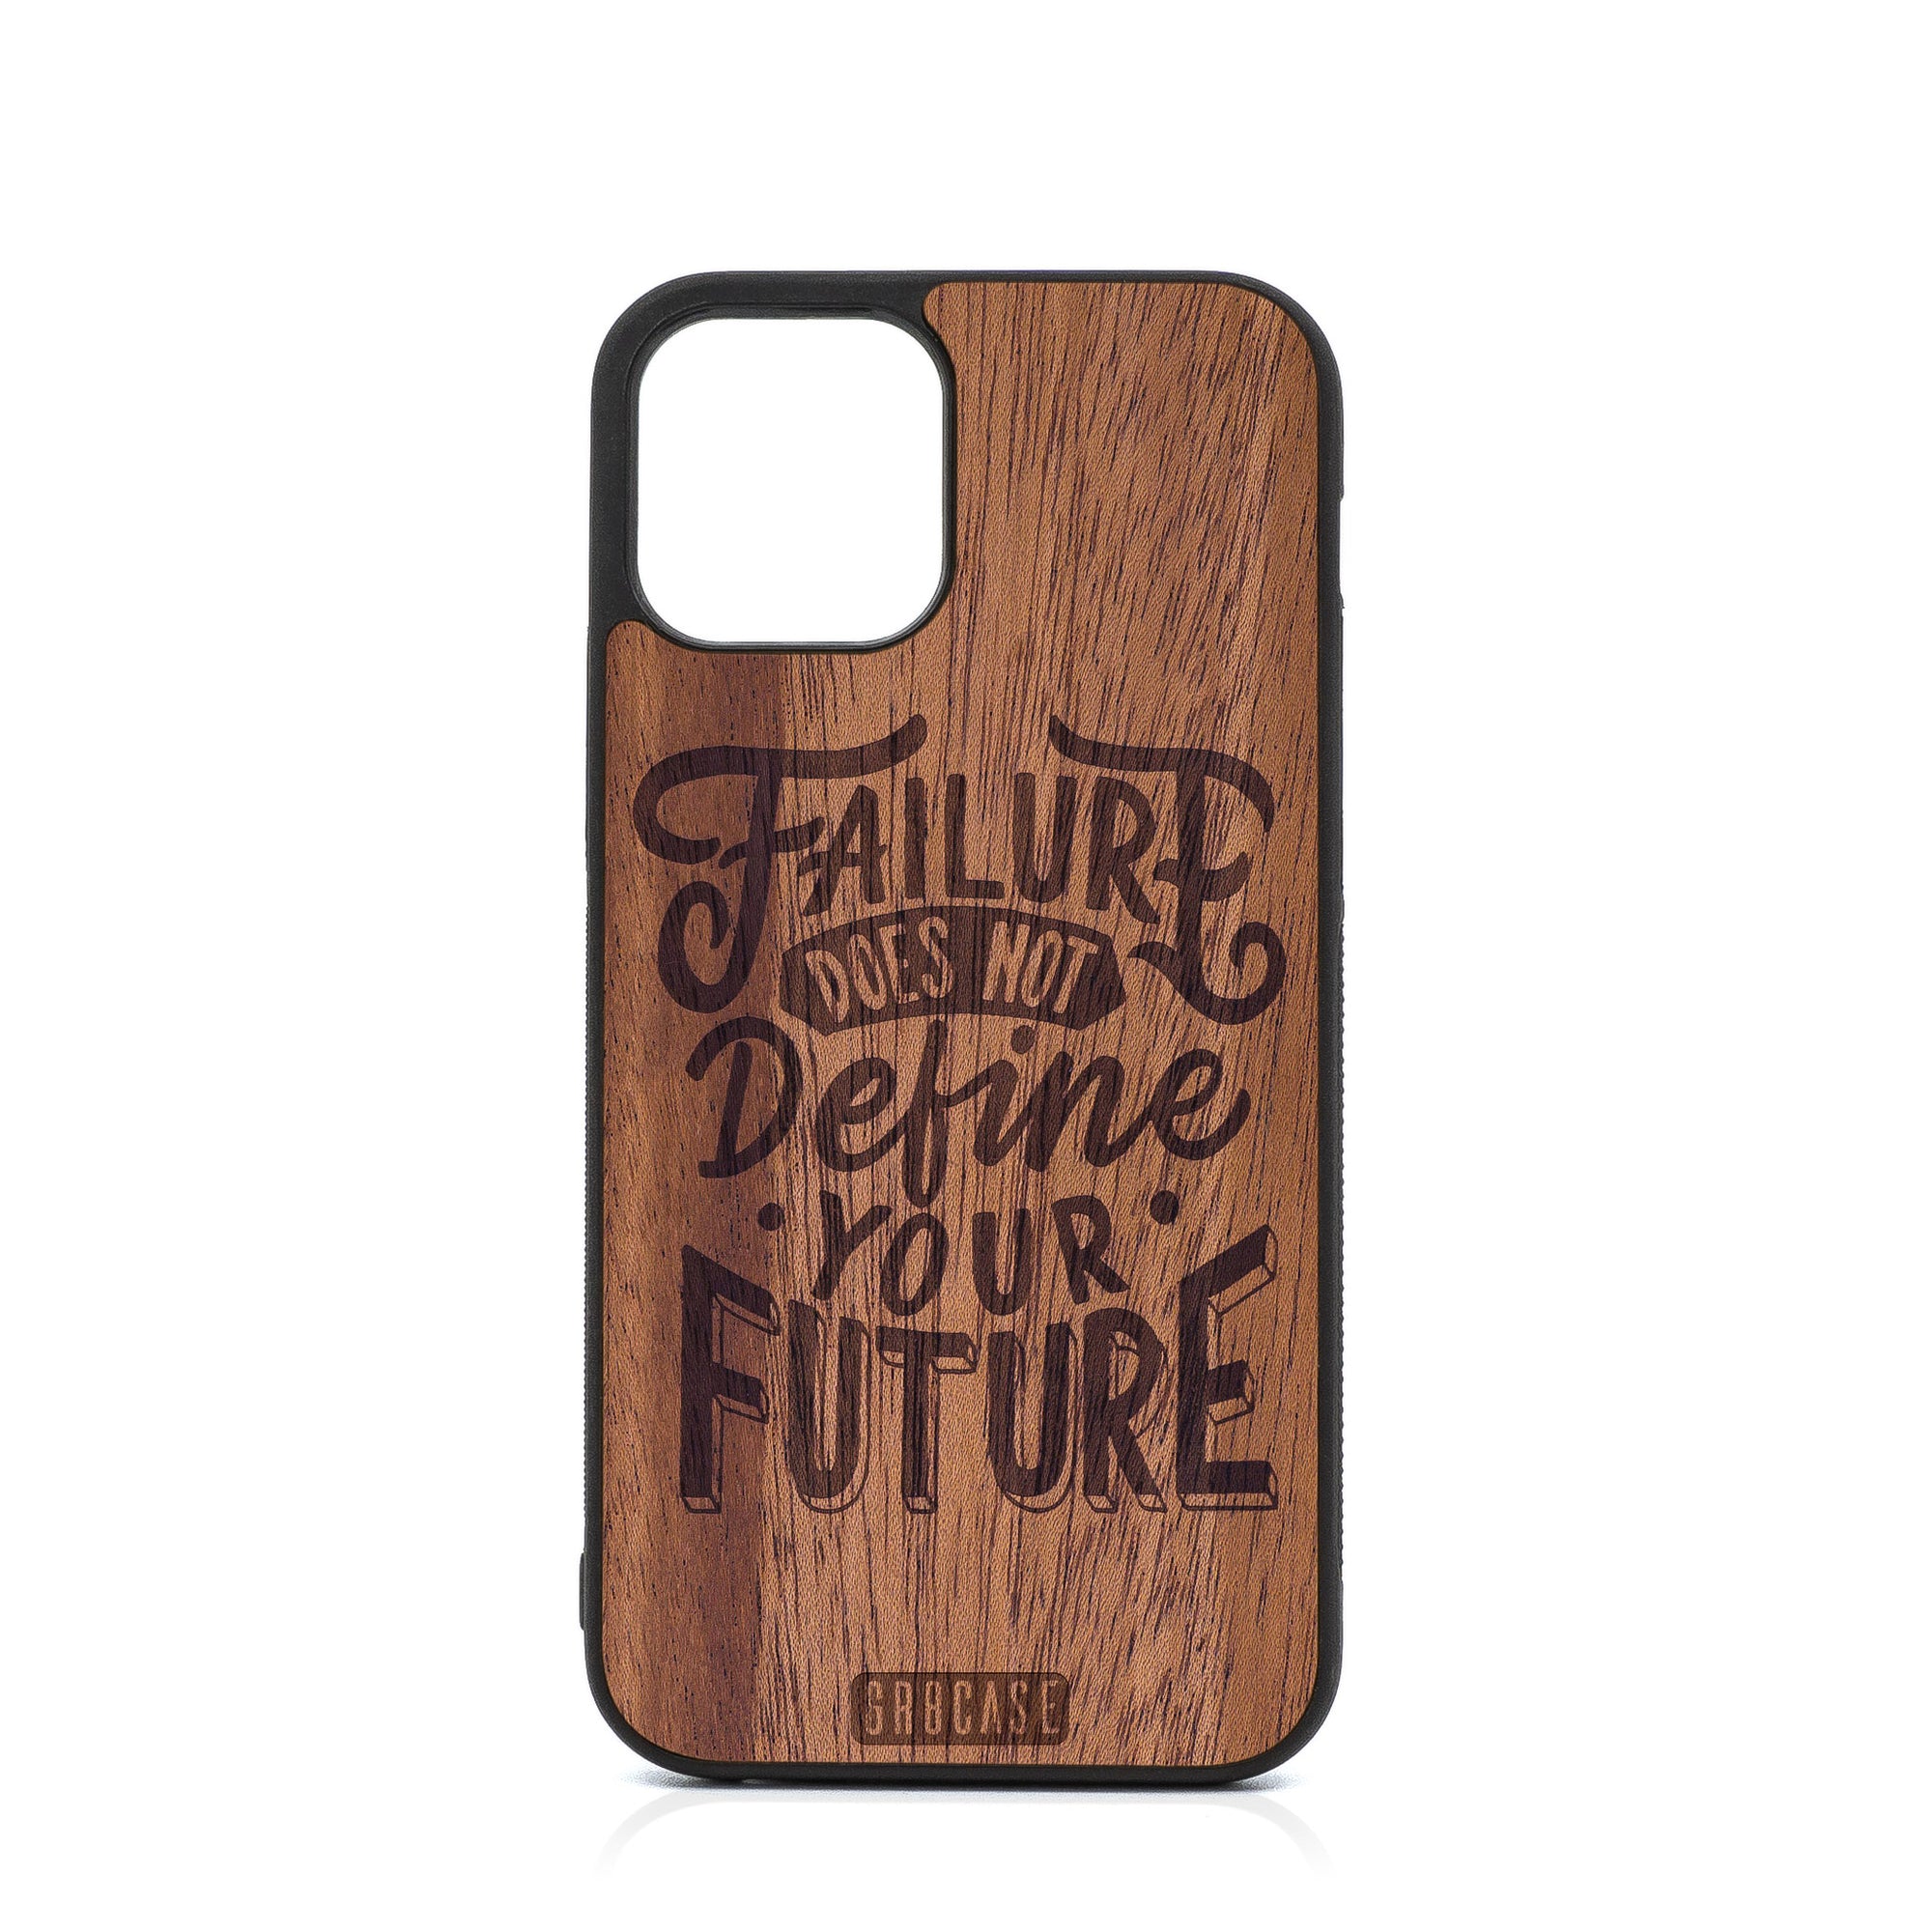 Failure Does Not Define Your Future Design Wood Case For iPhone 12